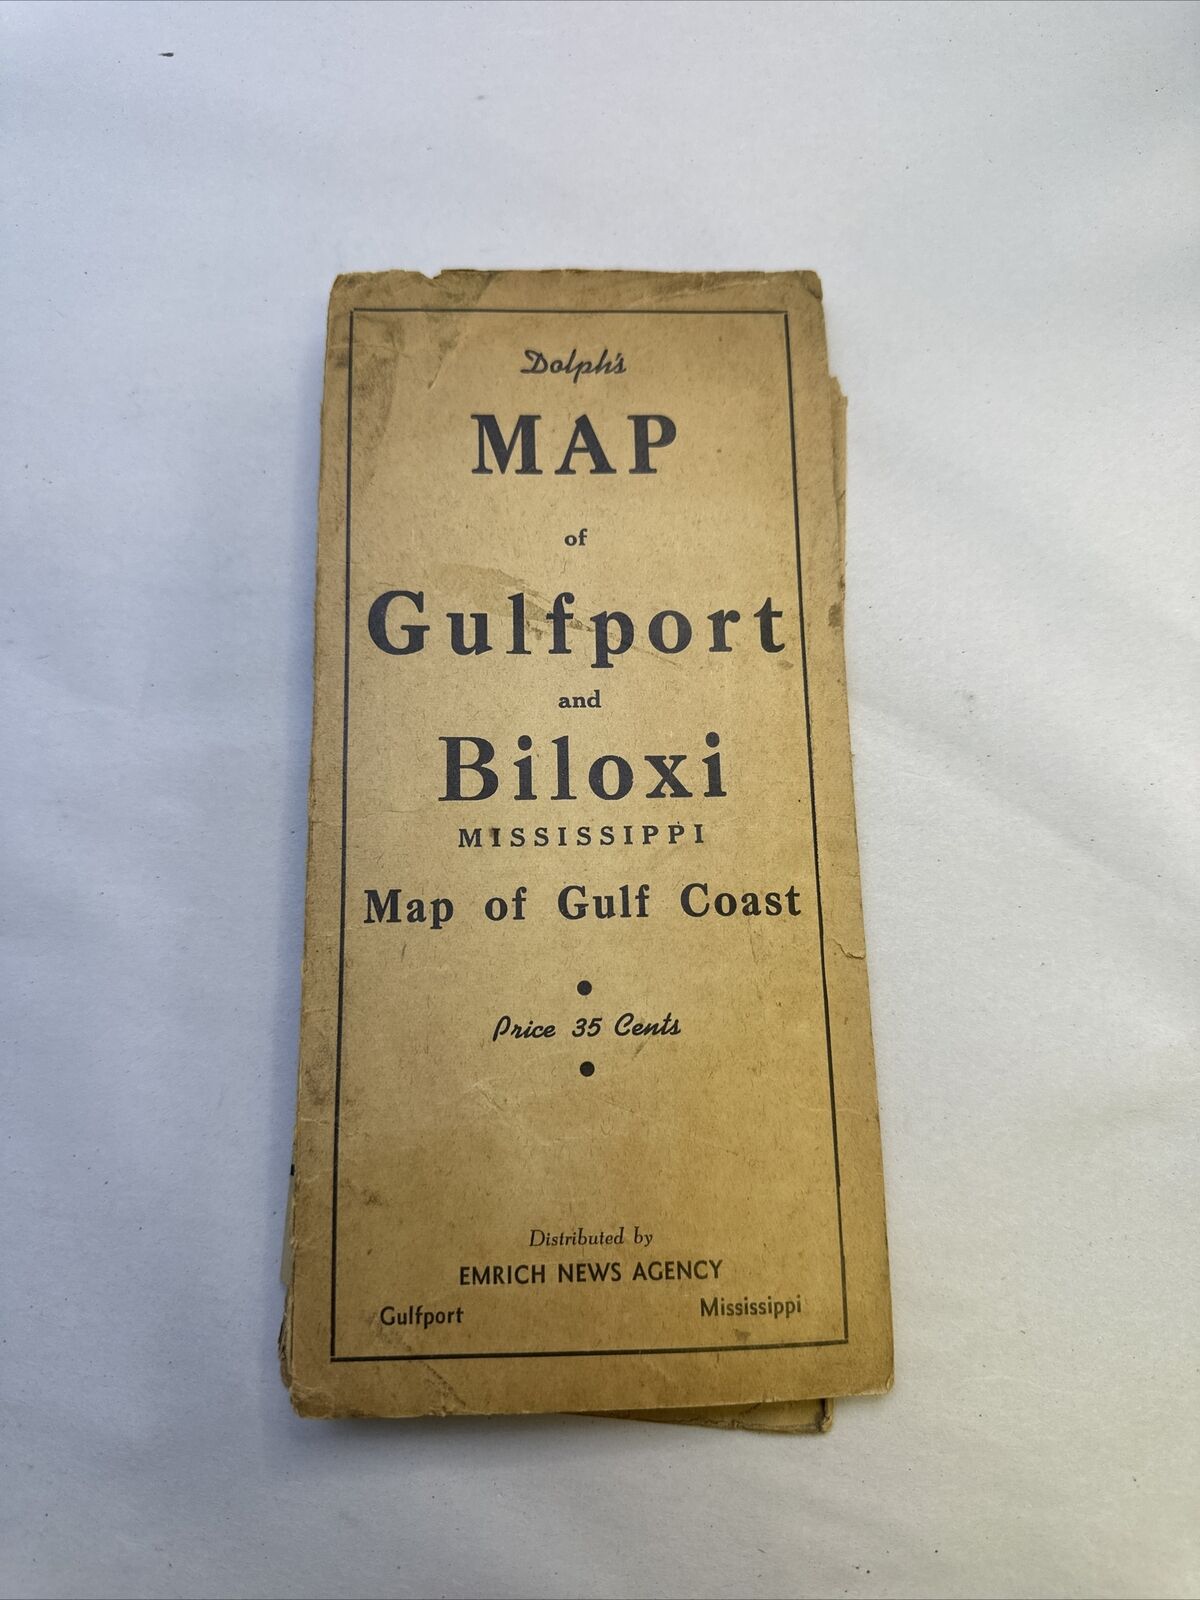 Dolph’s Map Of Gulfport And Biloxi Mississippi - Map Of Gulf Coast - Very Rare